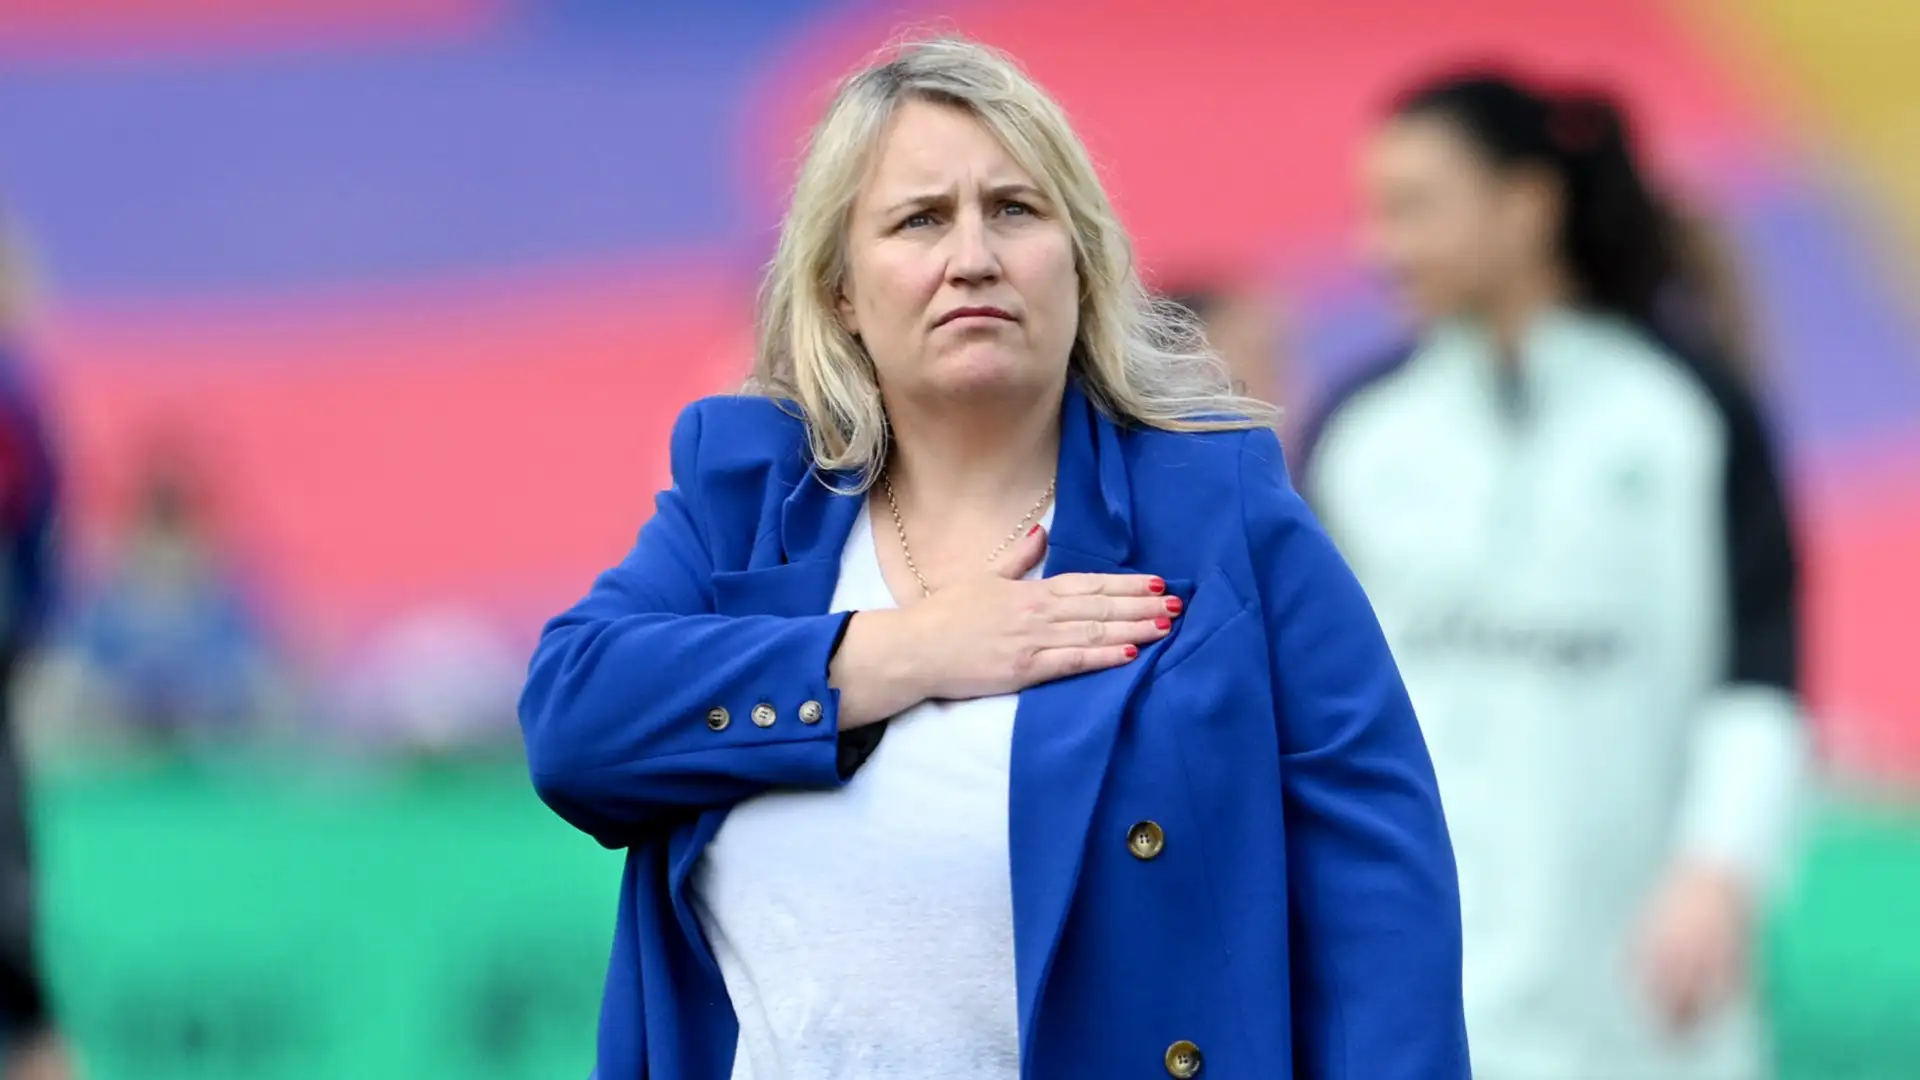 'A fitting finale!' - Emma Hayes geared up for Chelsea's WSL title decider against Man Utd as legendary manager admits she is 'knackered' ahead of move to USWNT